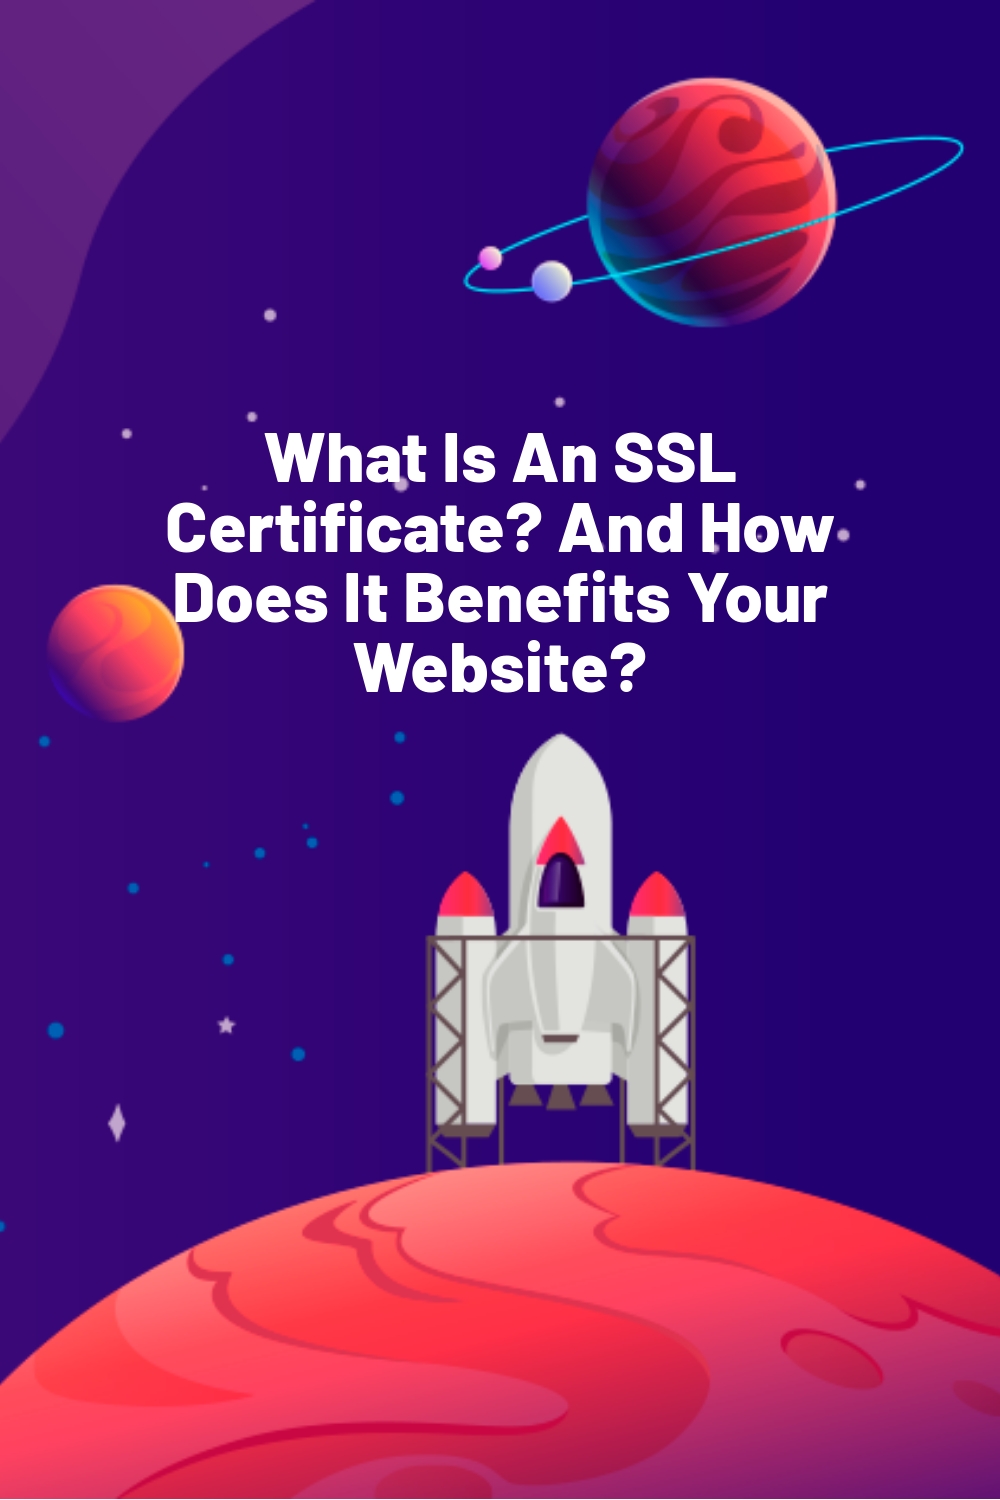 What Is An SSL Certificate? And How Does It Benefits Your Website?